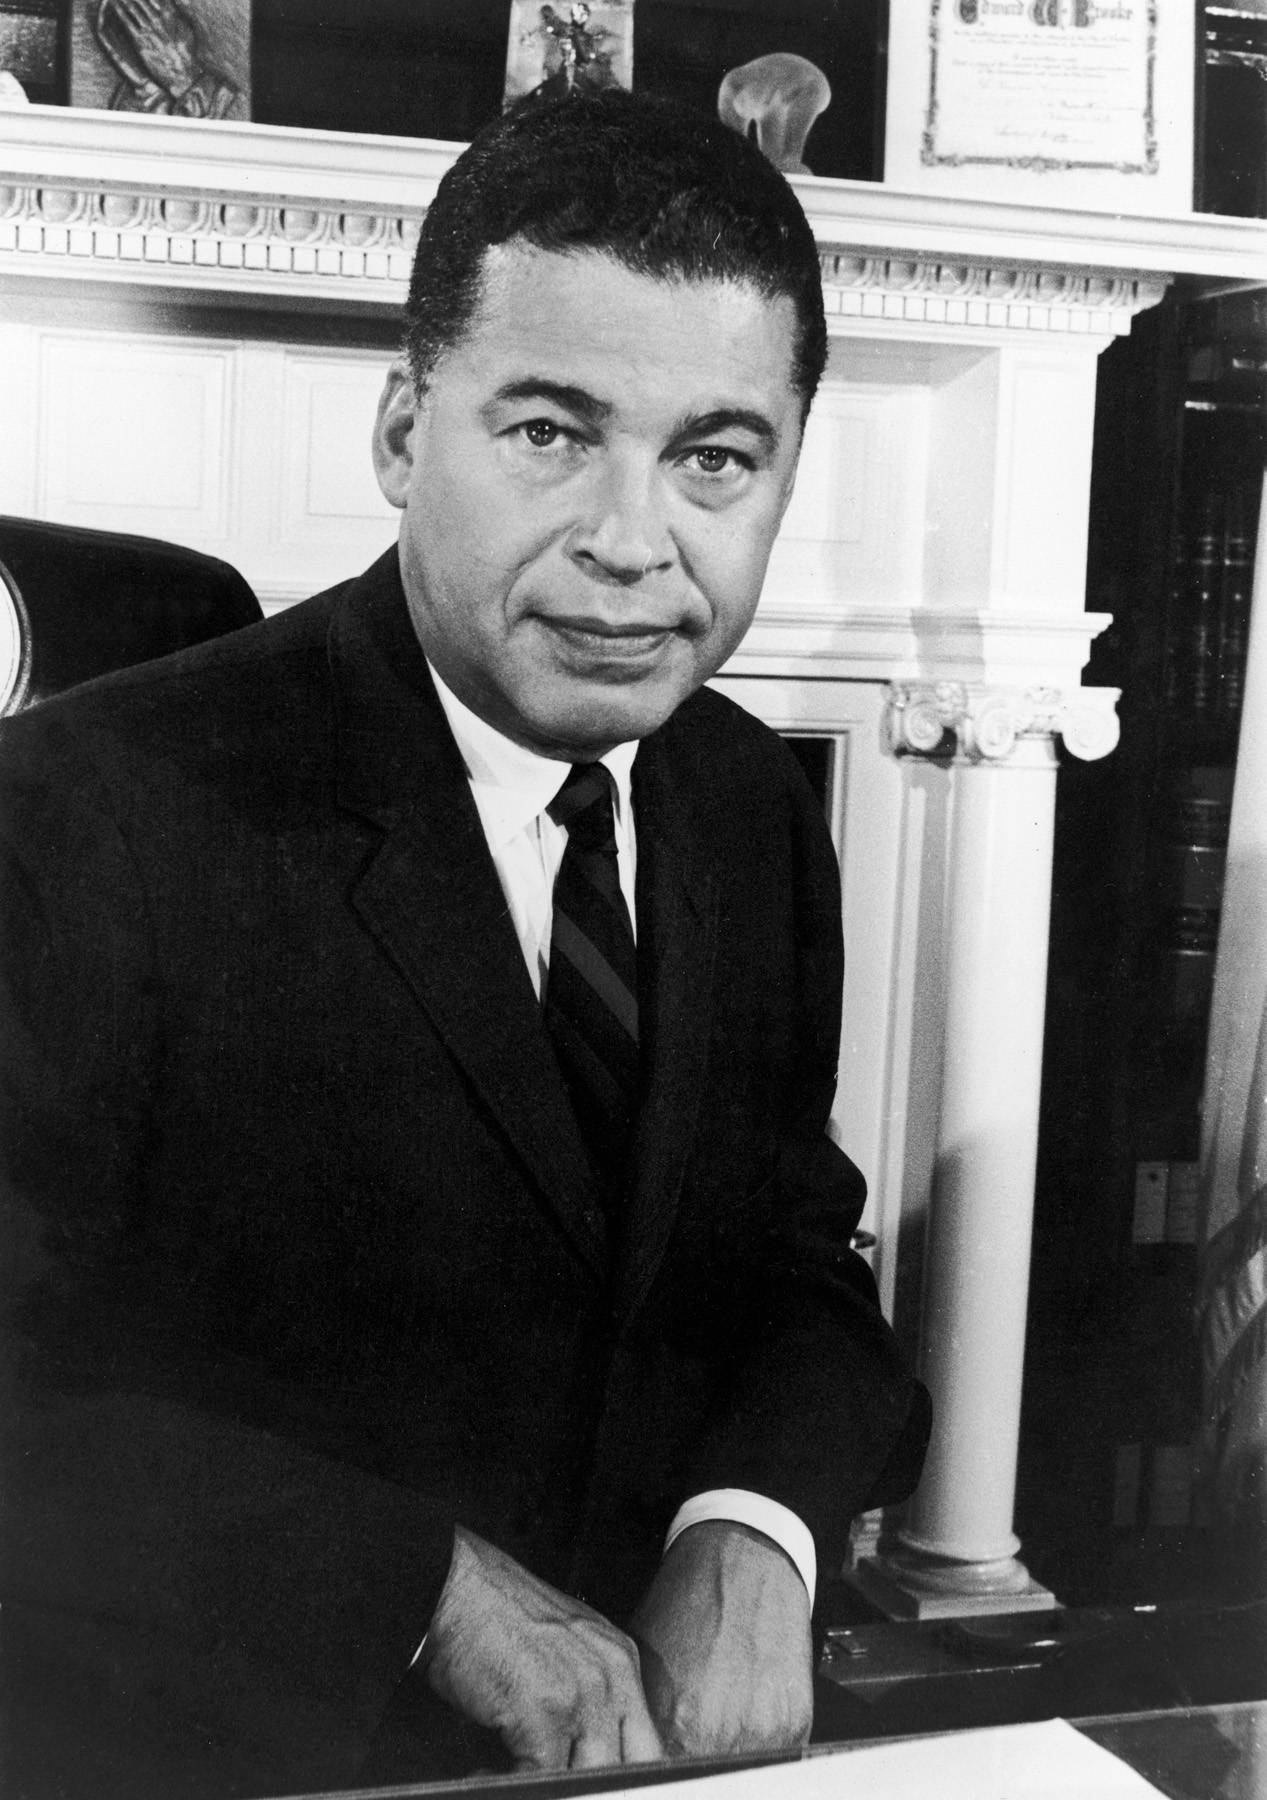 Edward William Brooke III elected the first African-American from Massachusetts